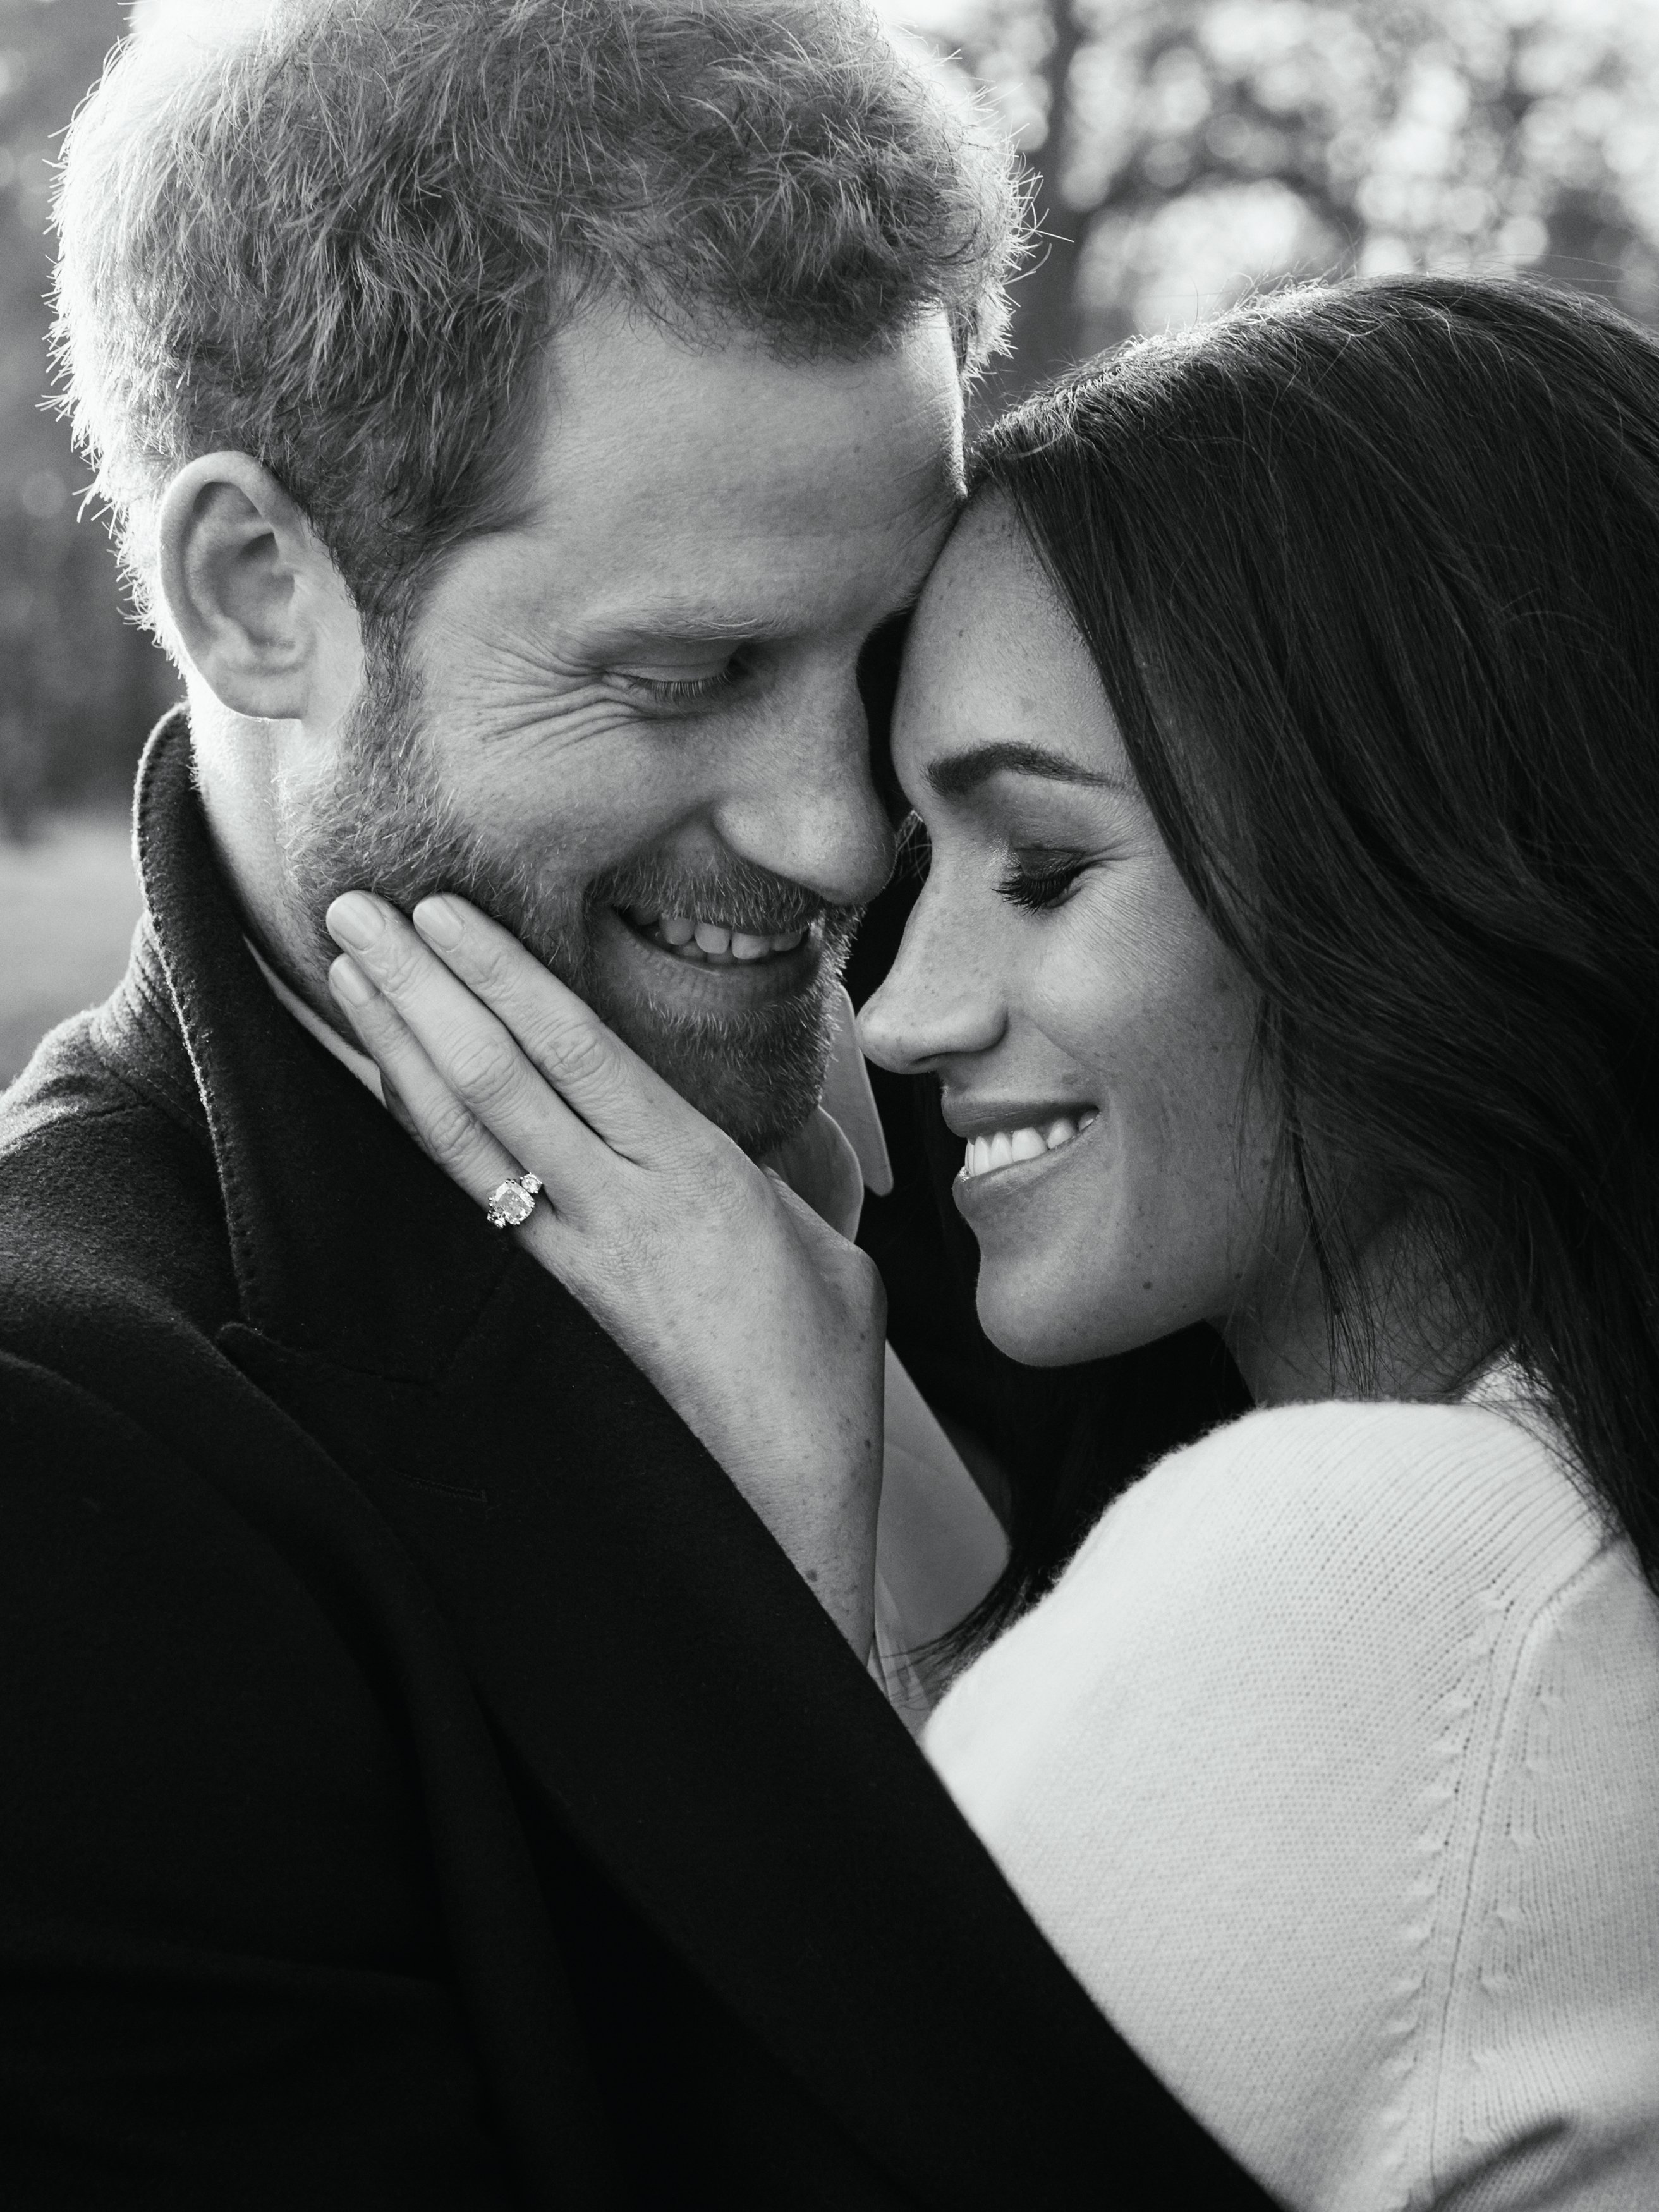 Prince Harry and Meghan Markle pose for their one of two official engagement photos at Frogmore House in December, 2017 | Photo: Getty Images